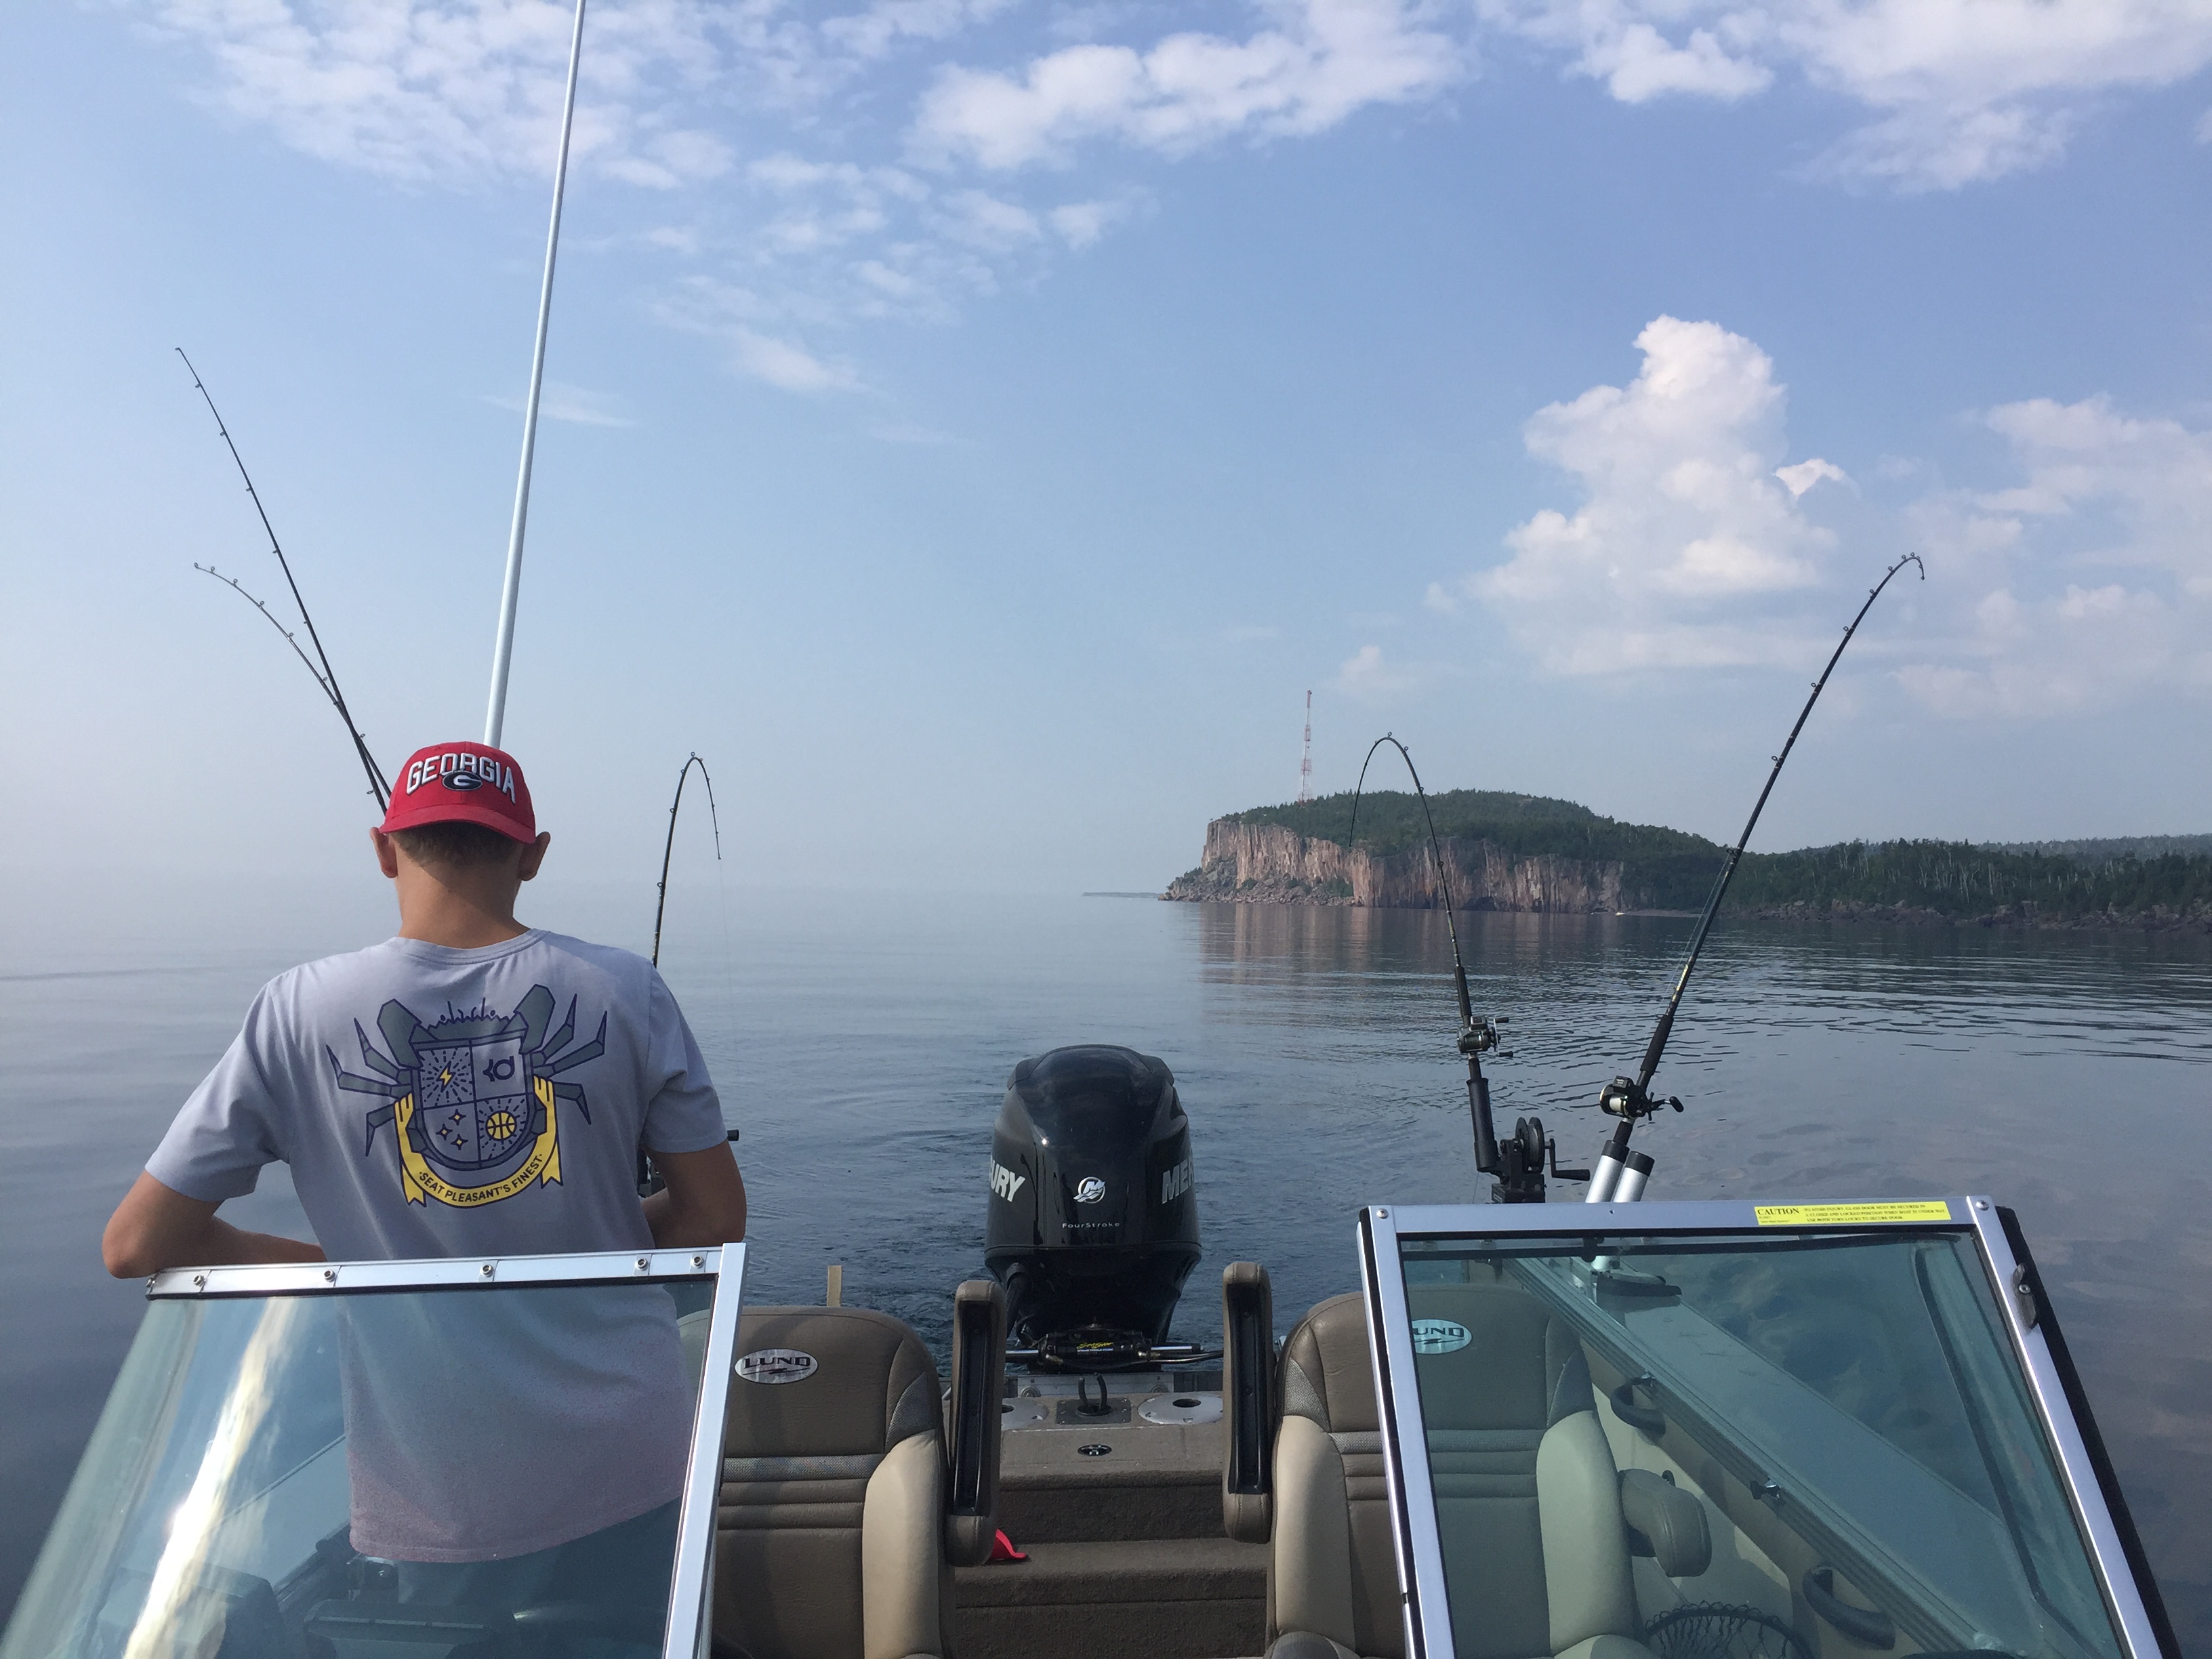 Jigging on the Great Lakes - the Alternative to Trolling by Cory